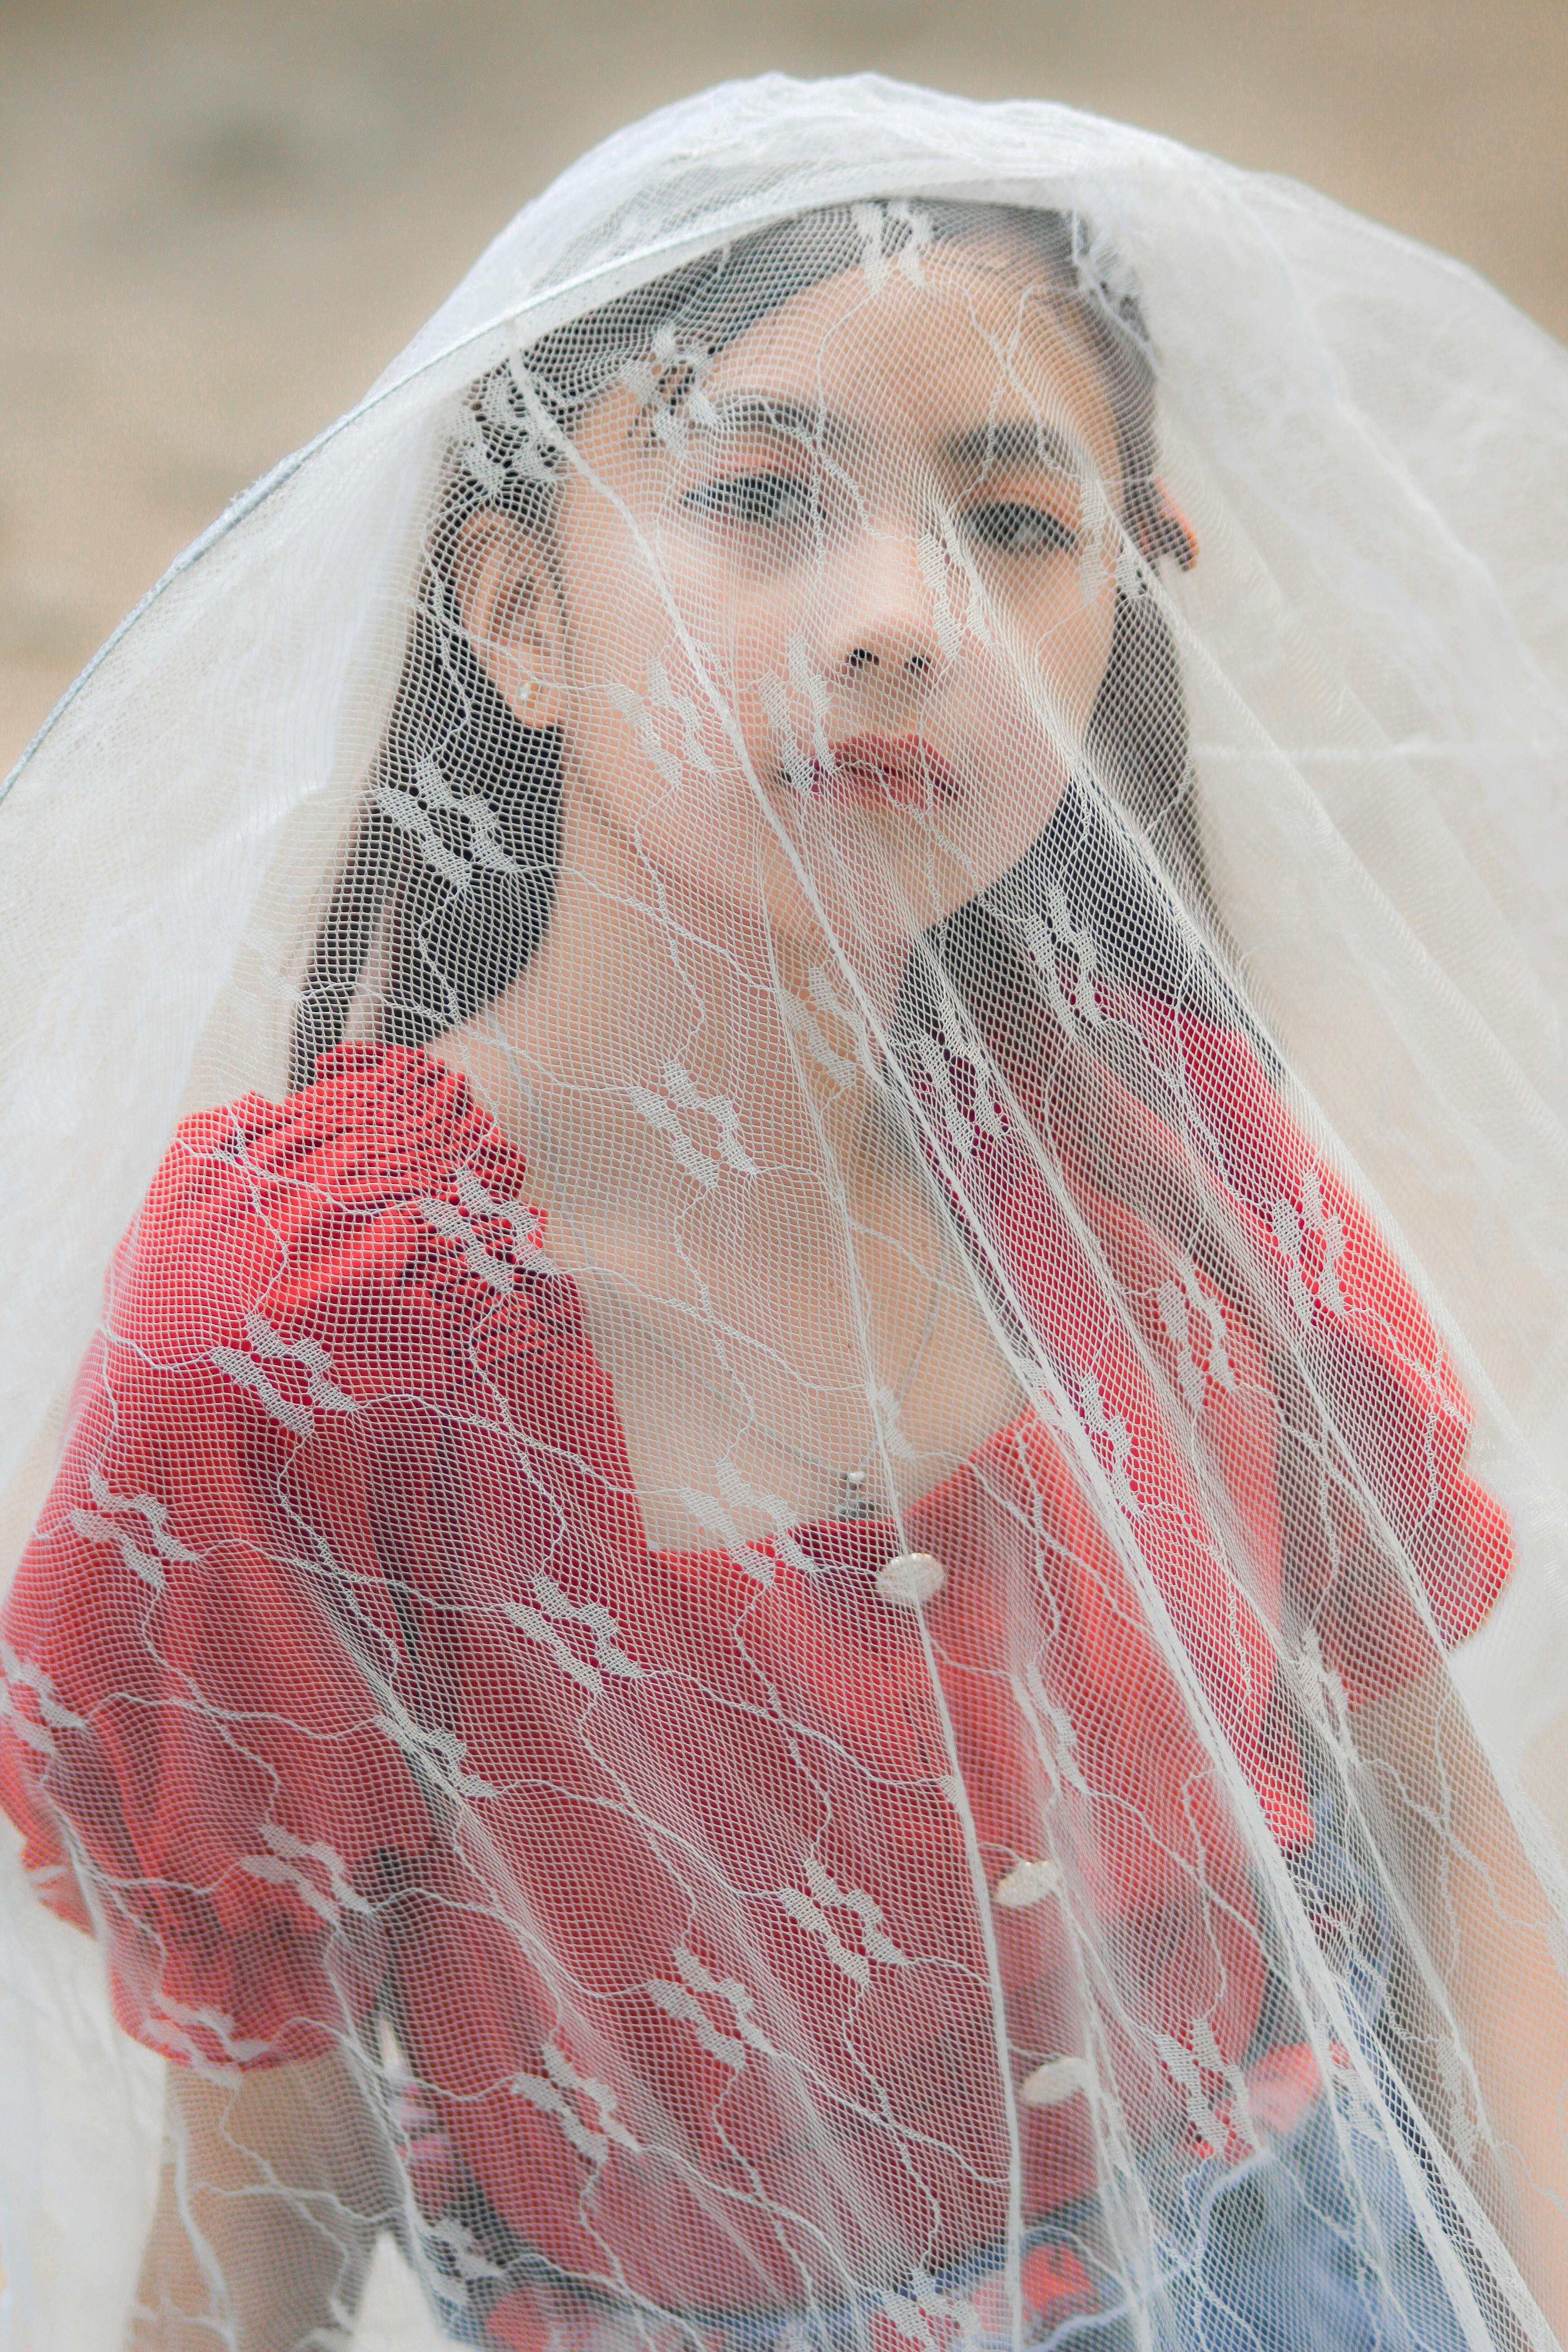 A little girl playing dress up | Source: Pexels